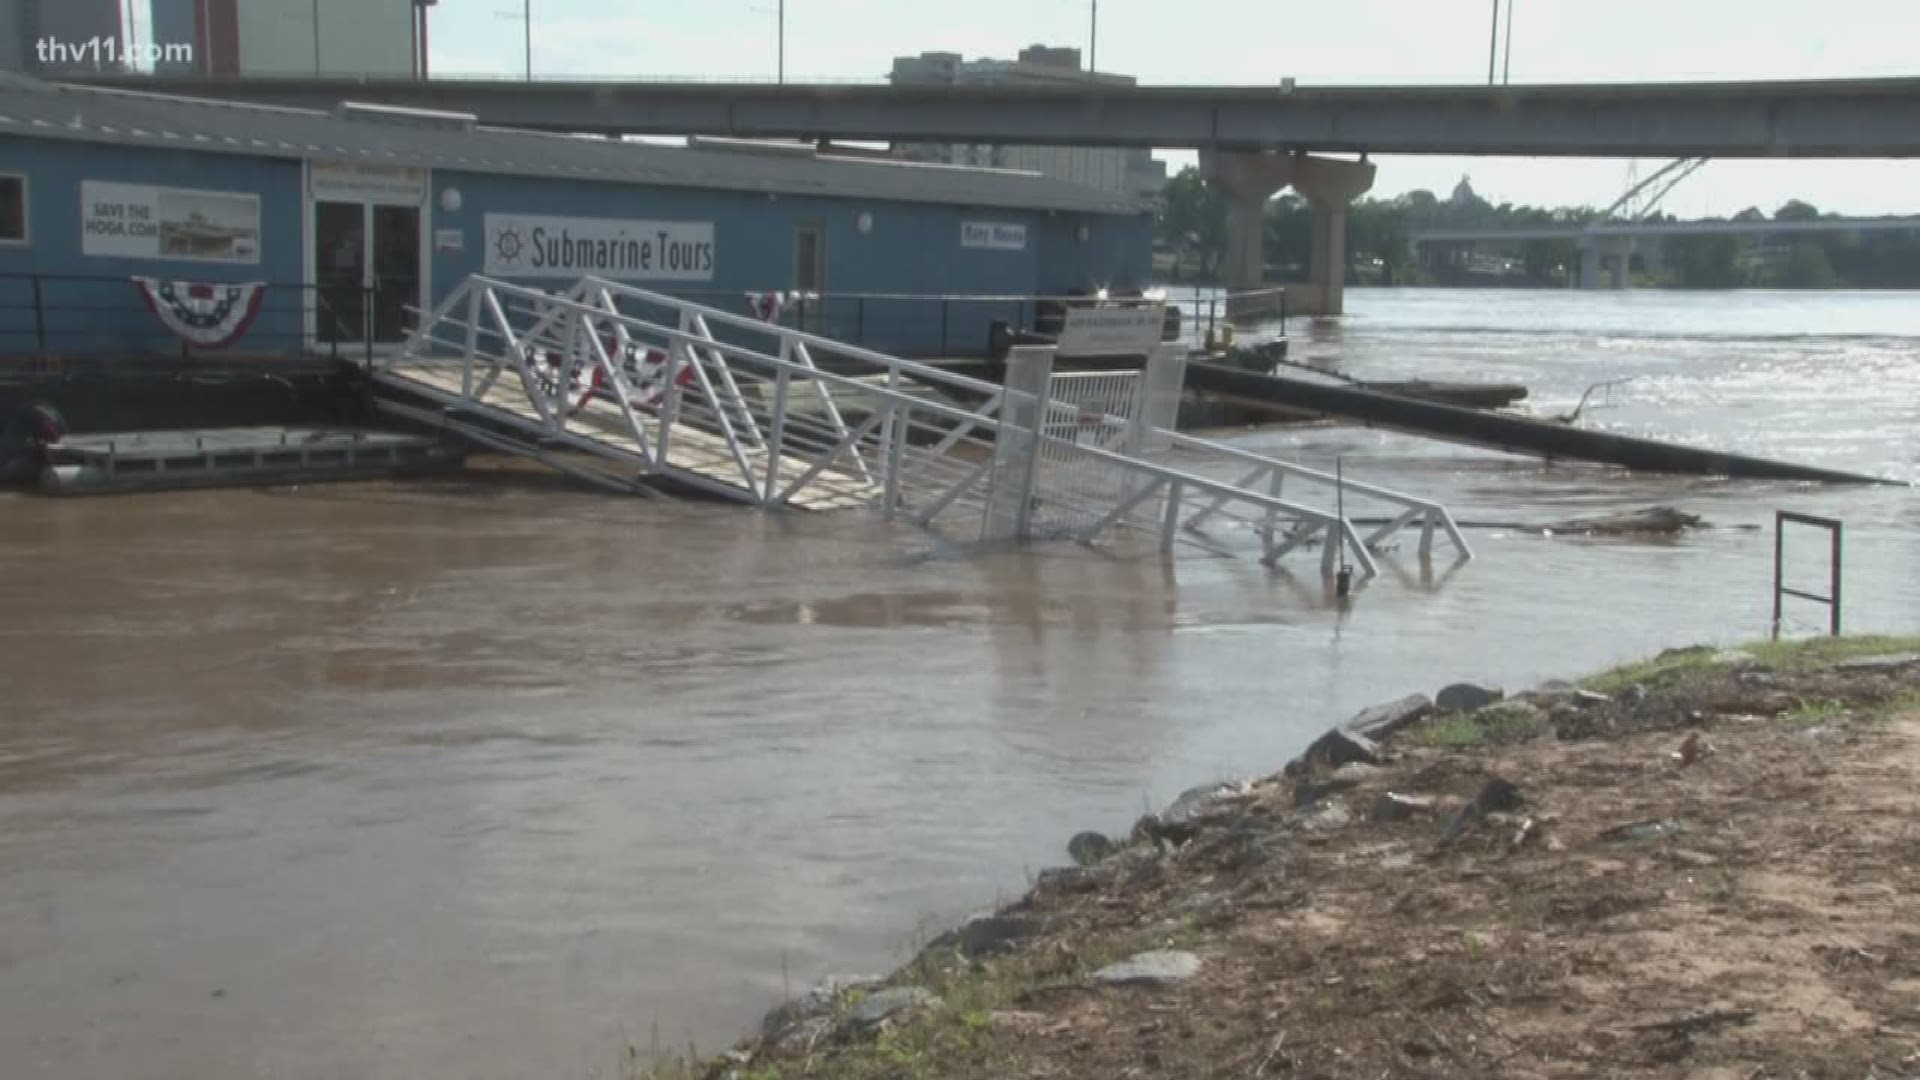 As water on the Arkansas River continues to rise, people in the Little Rock area are asking what to expect there.